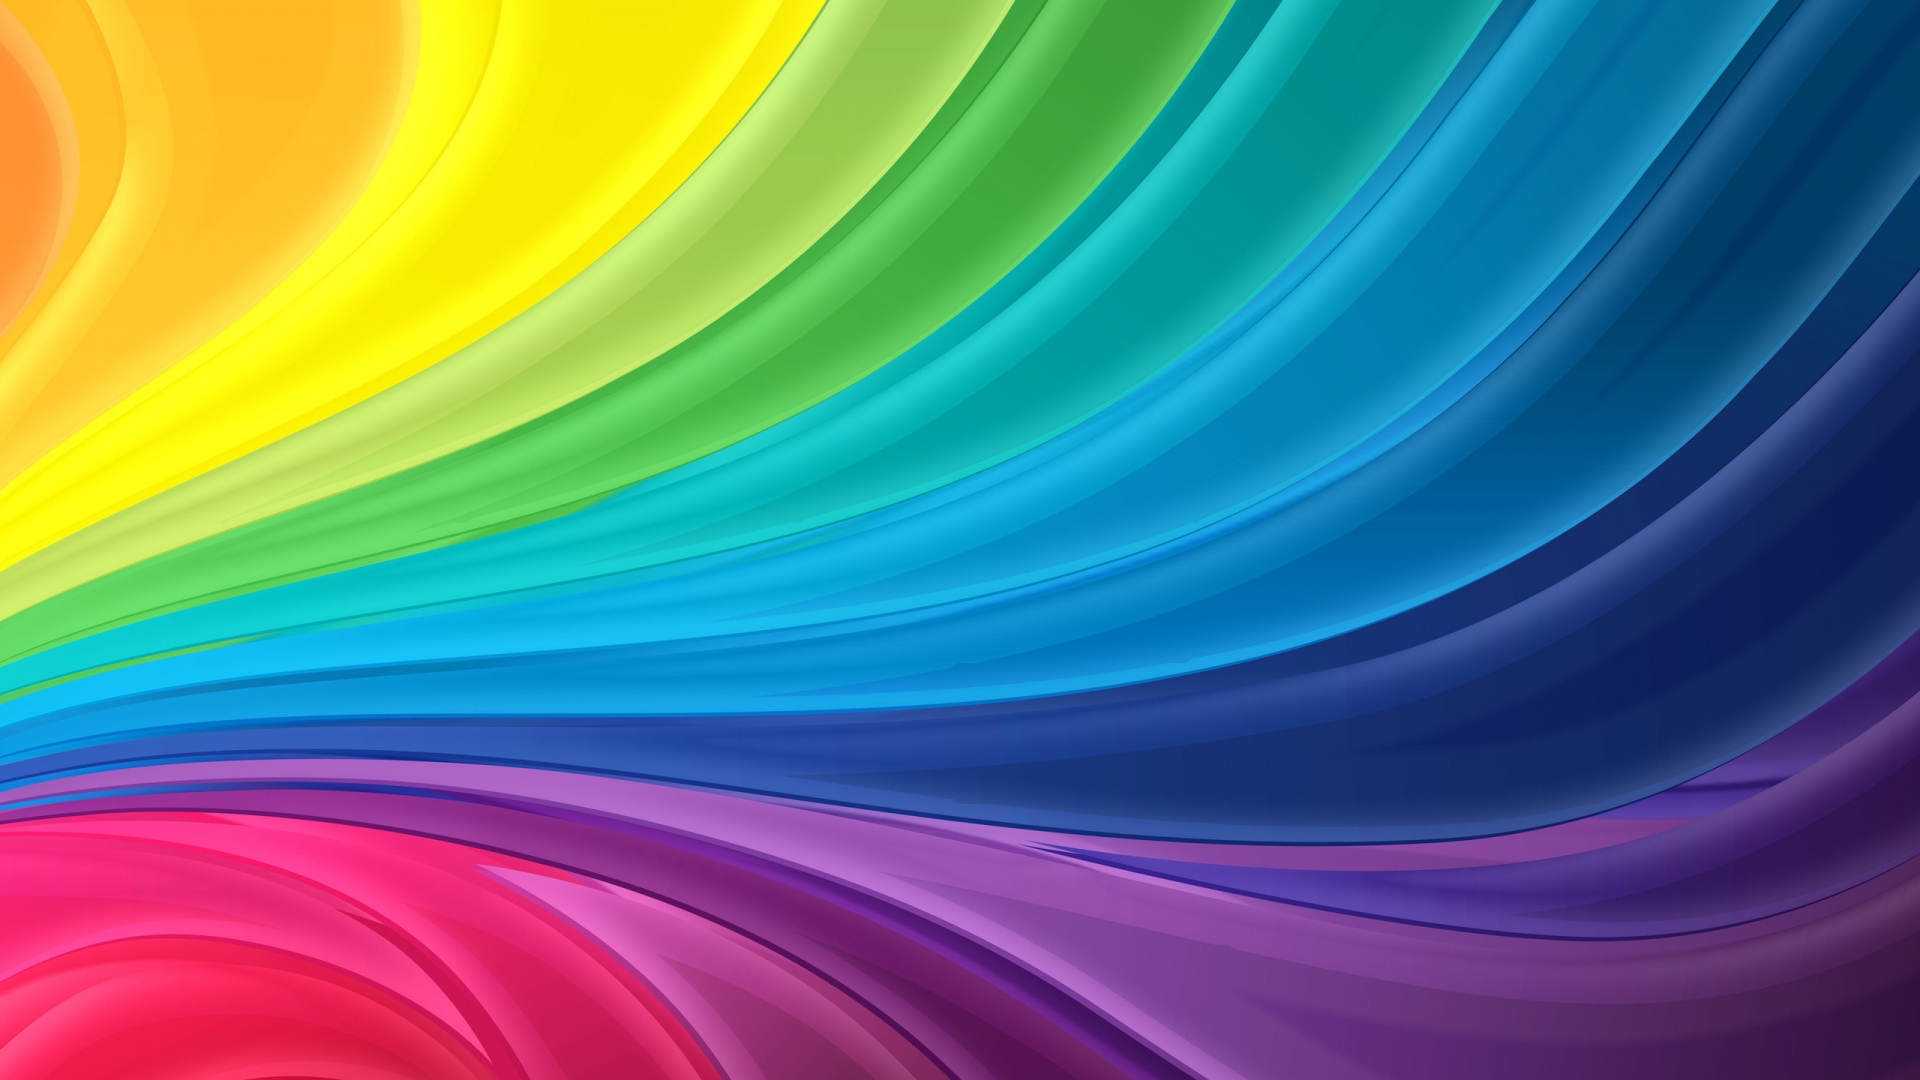 Curl Rainbow for 1920 x 1080 HDTV 1080p resolution